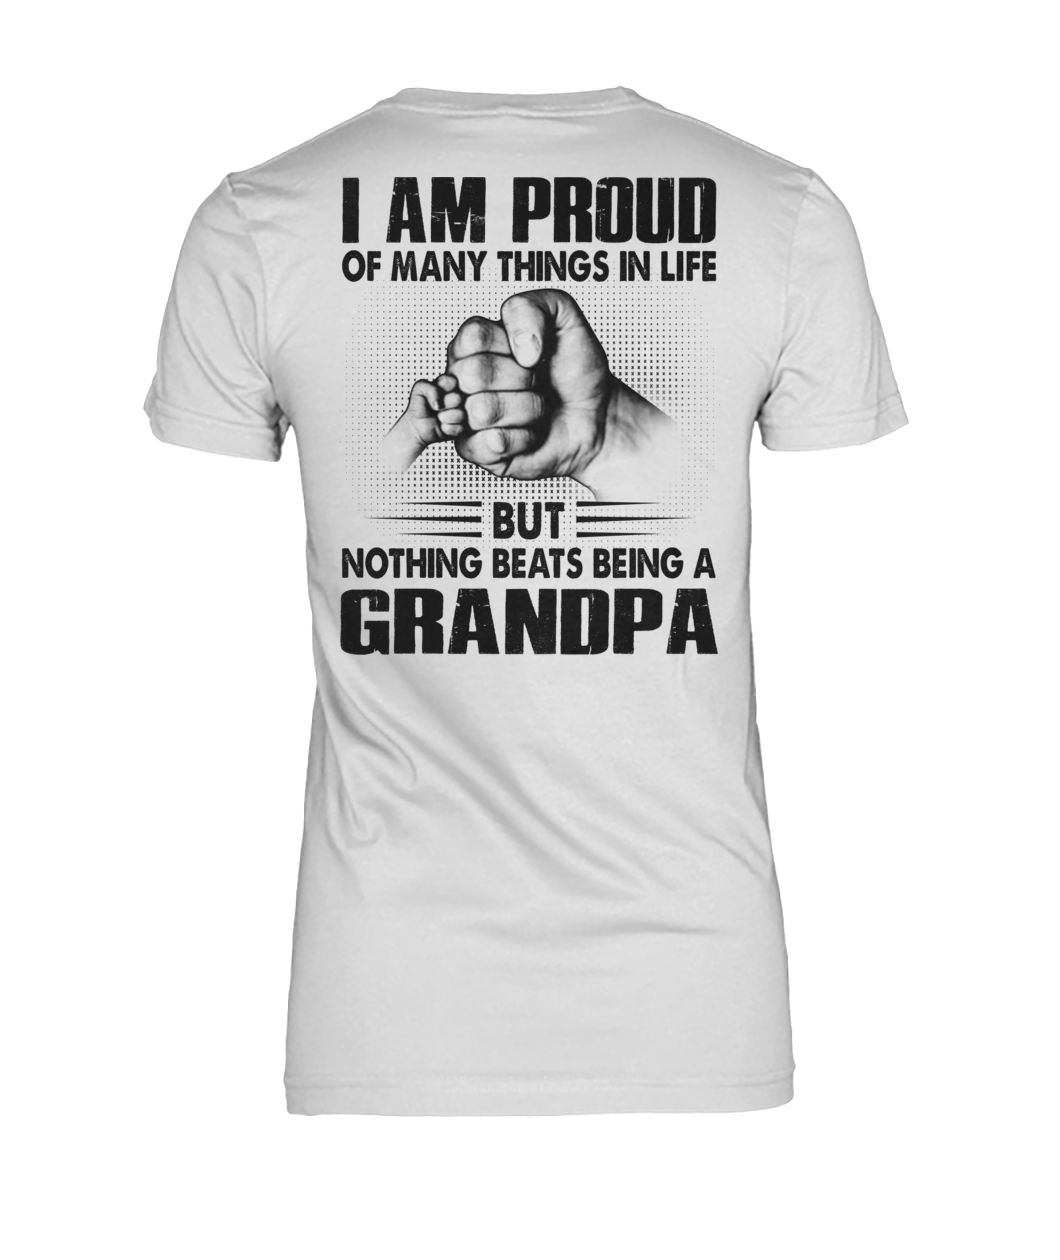 I am proud of many things in life but nothing beats being a grandpa women's crew tee